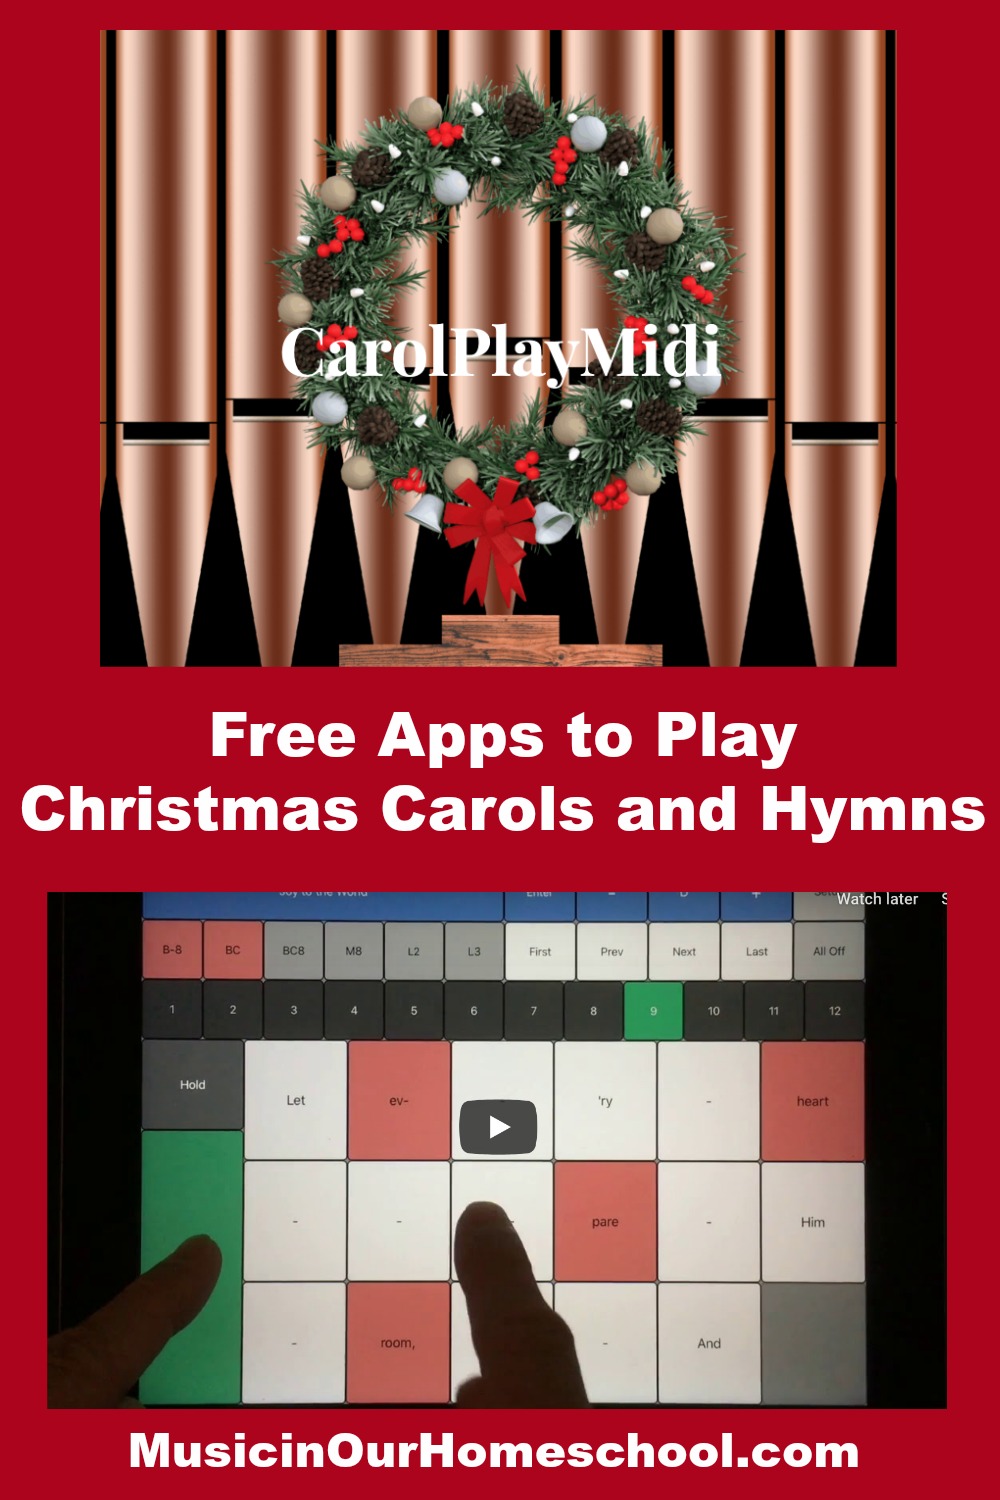 Free Apps to Play Christmas Carols and Hymns